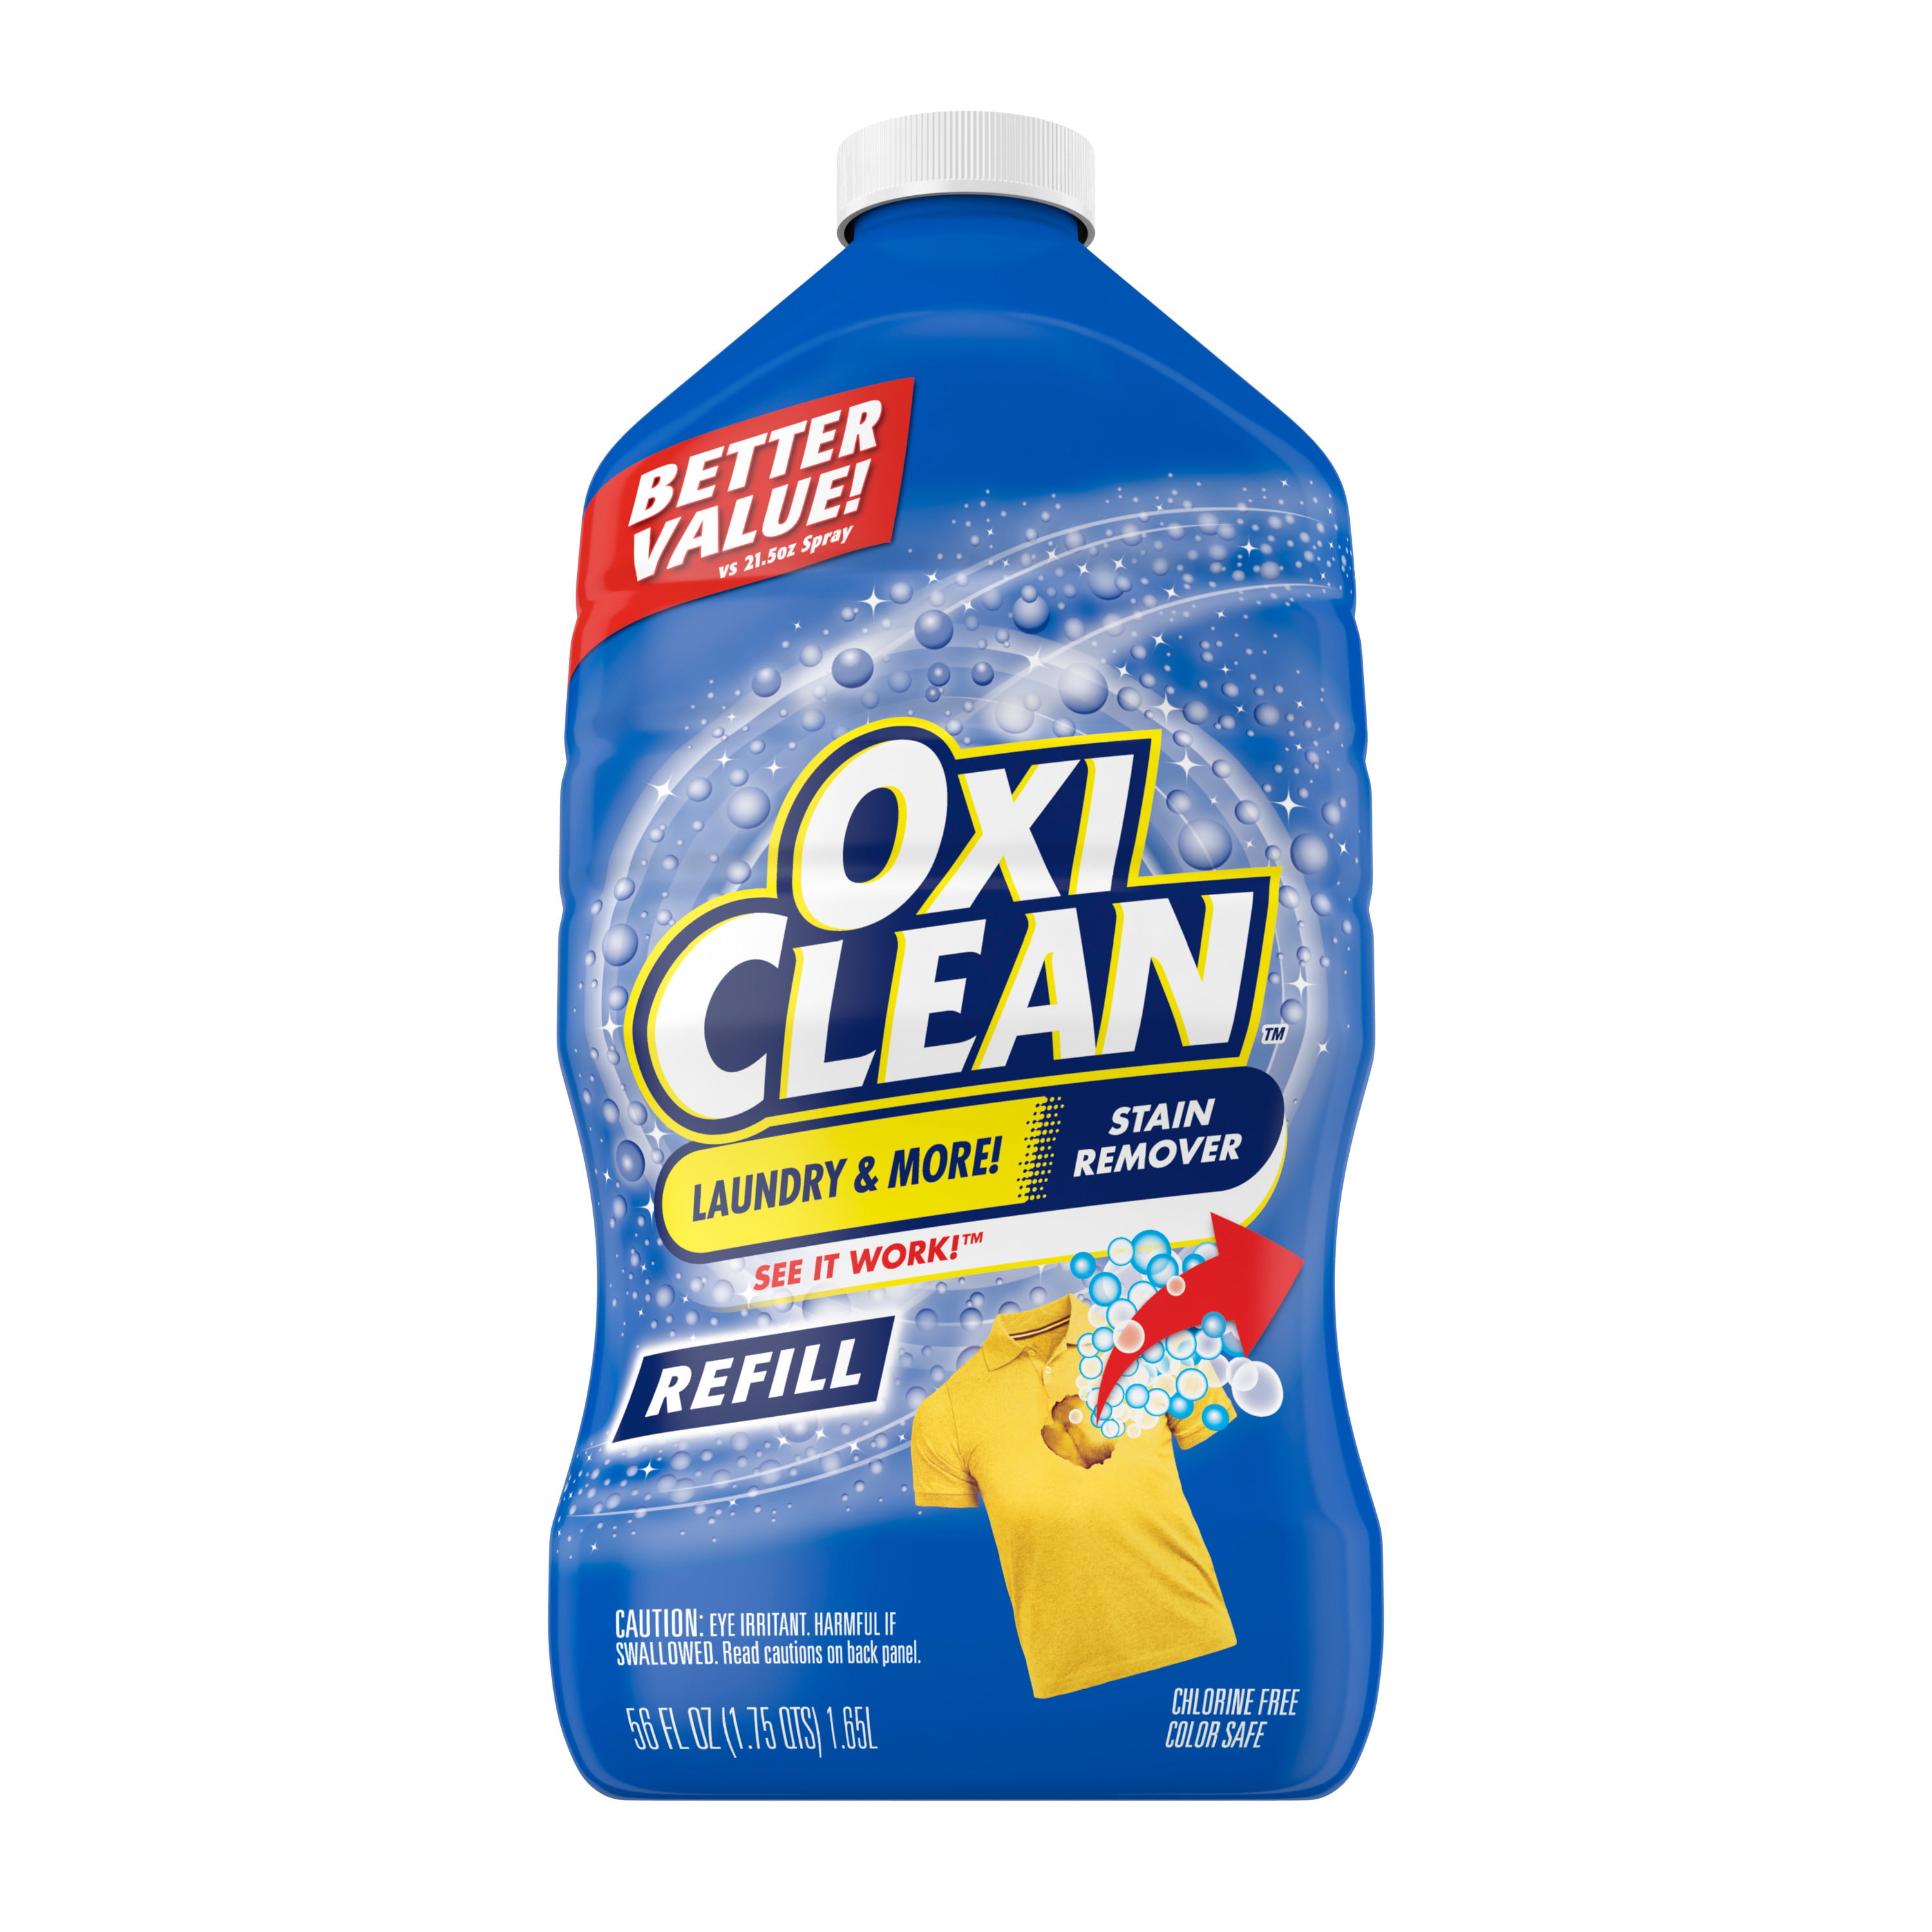 oxiclean-laundry-stain-remover-spray-refill-56-oz-walmart